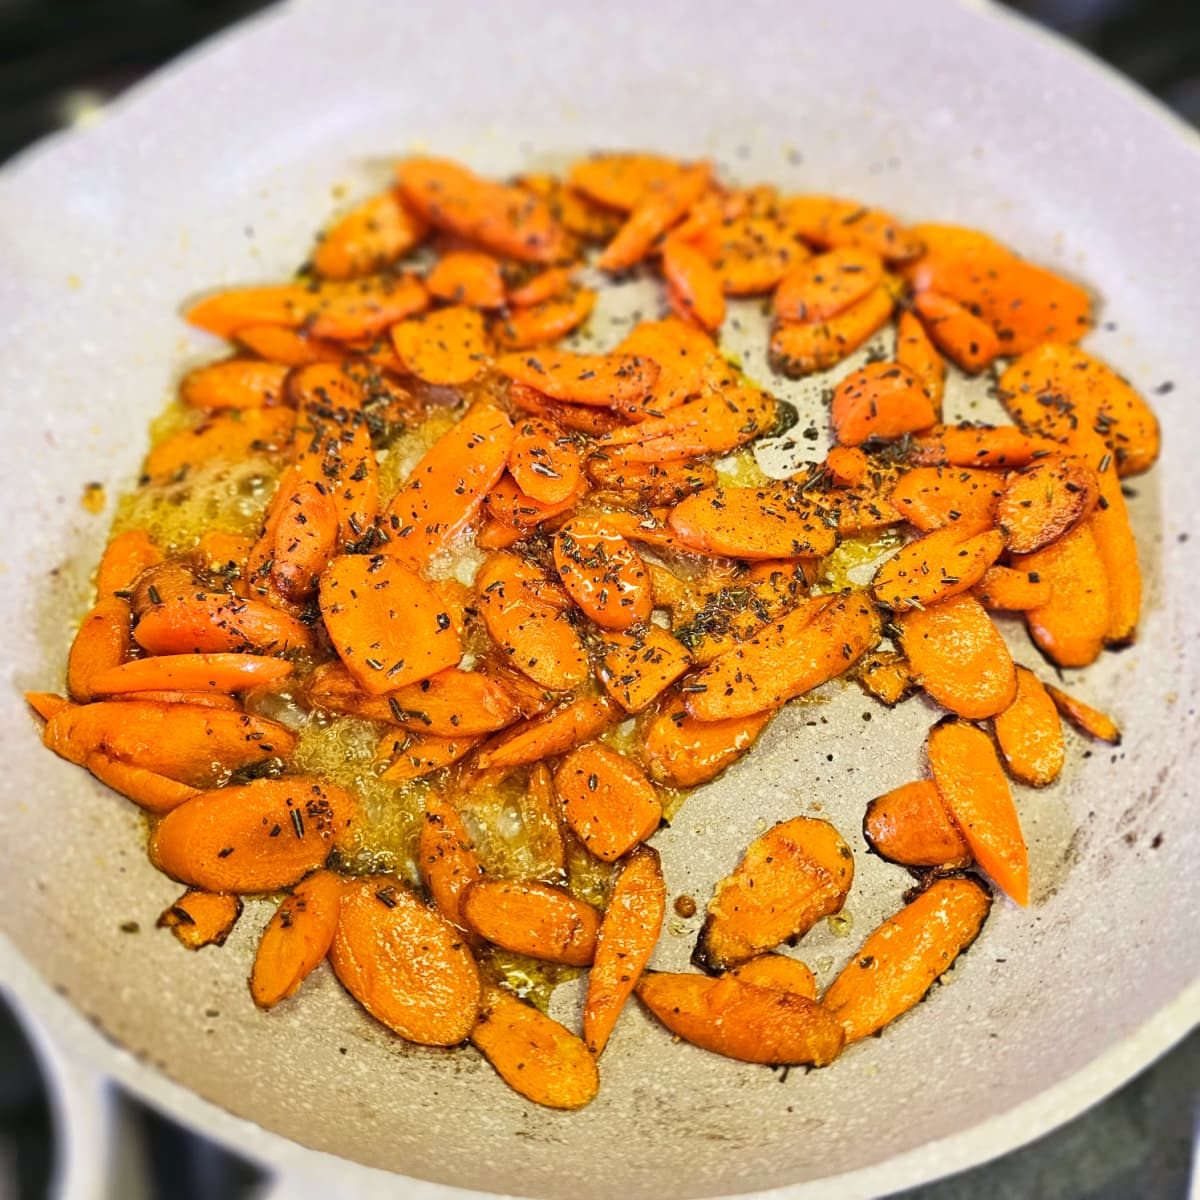 Honeyed Carrots with flecks of minced rosemary on top in a light colored skillet